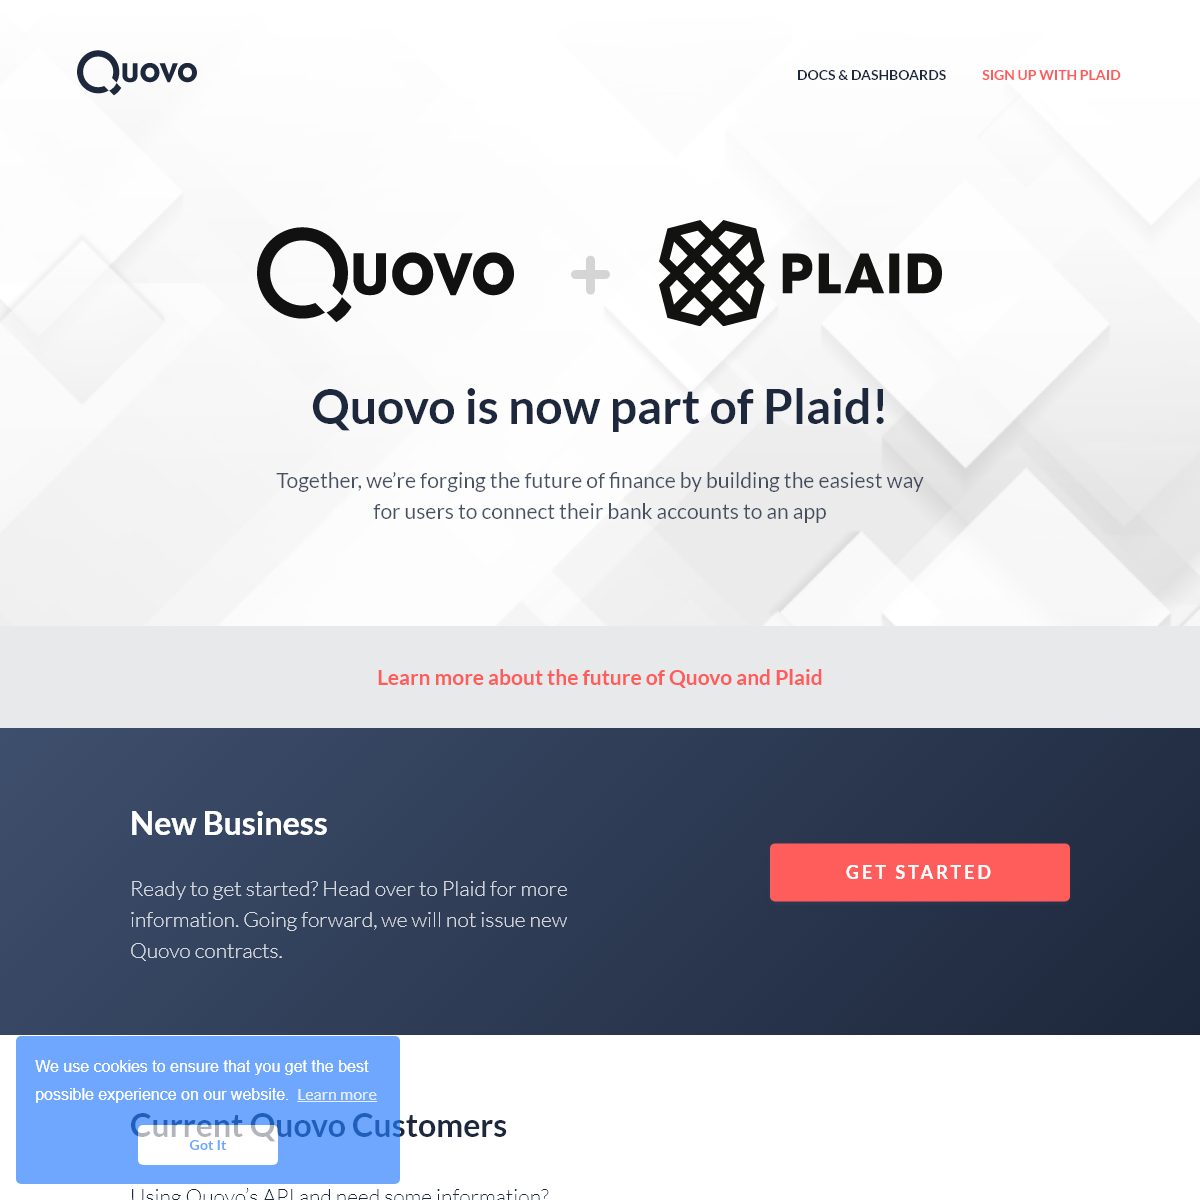 A complete backup of quovo.com